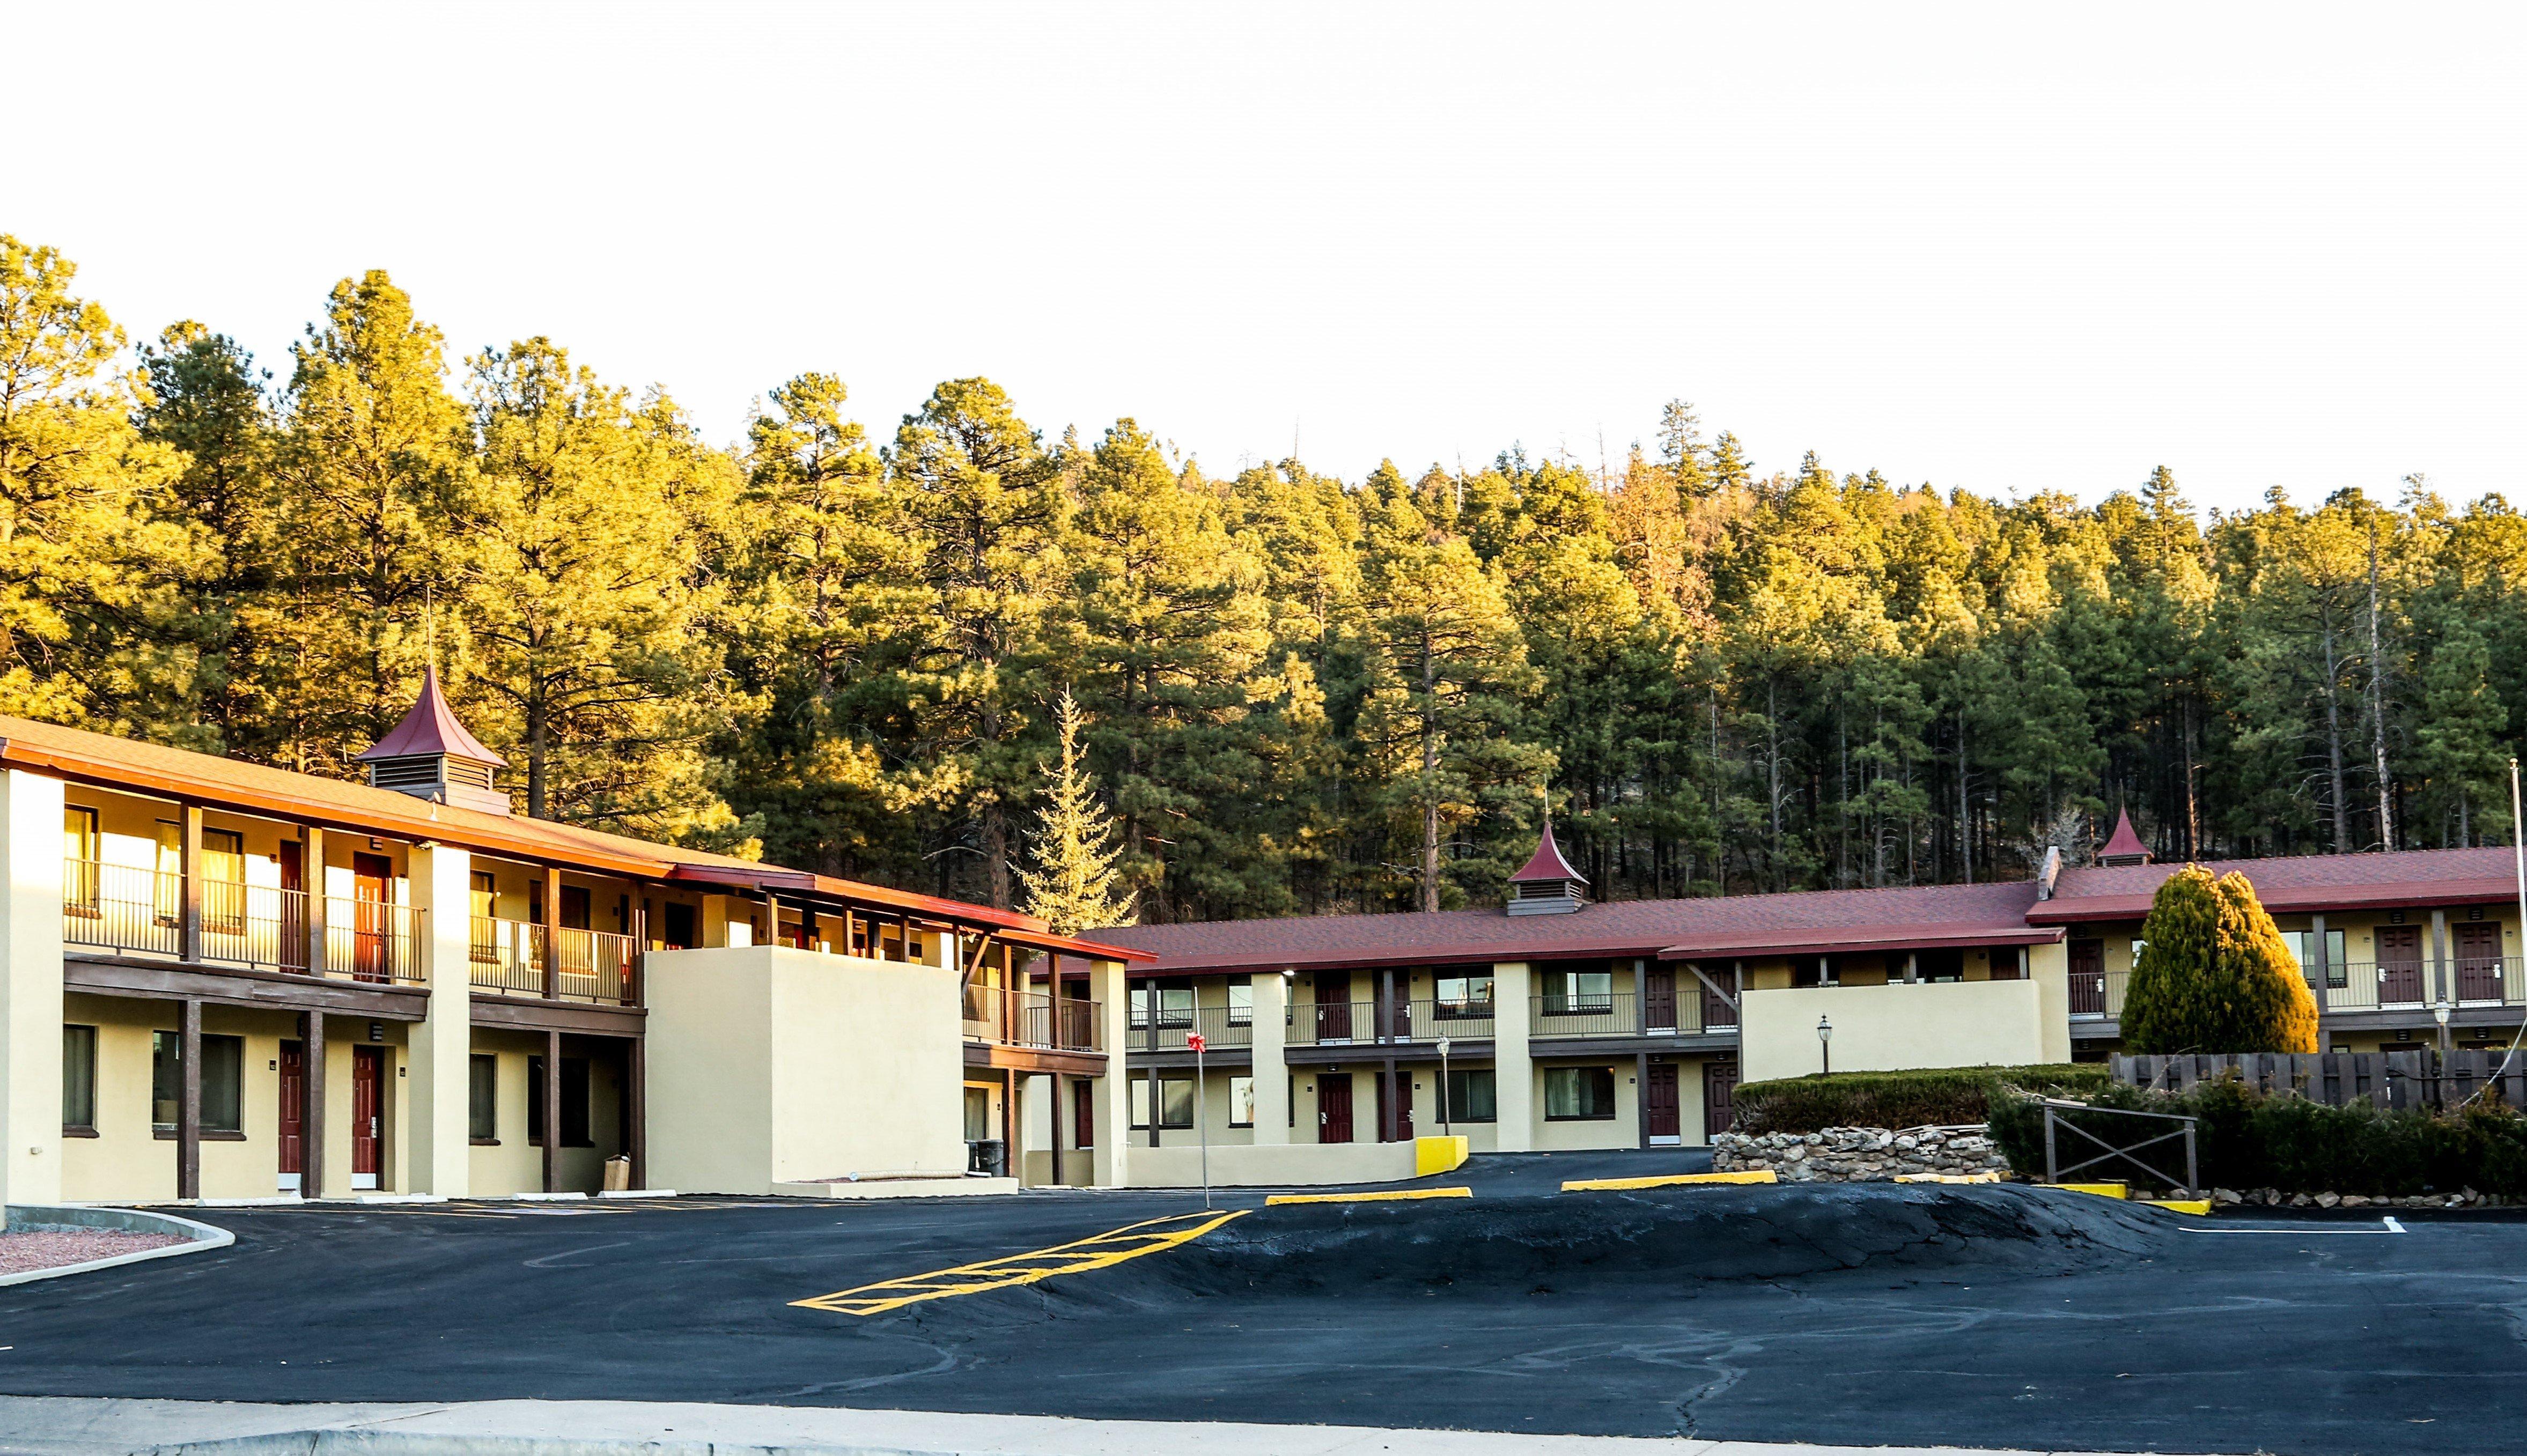 Red Roof Inn Plus+ Williams - Grand Canyon Exterior foto